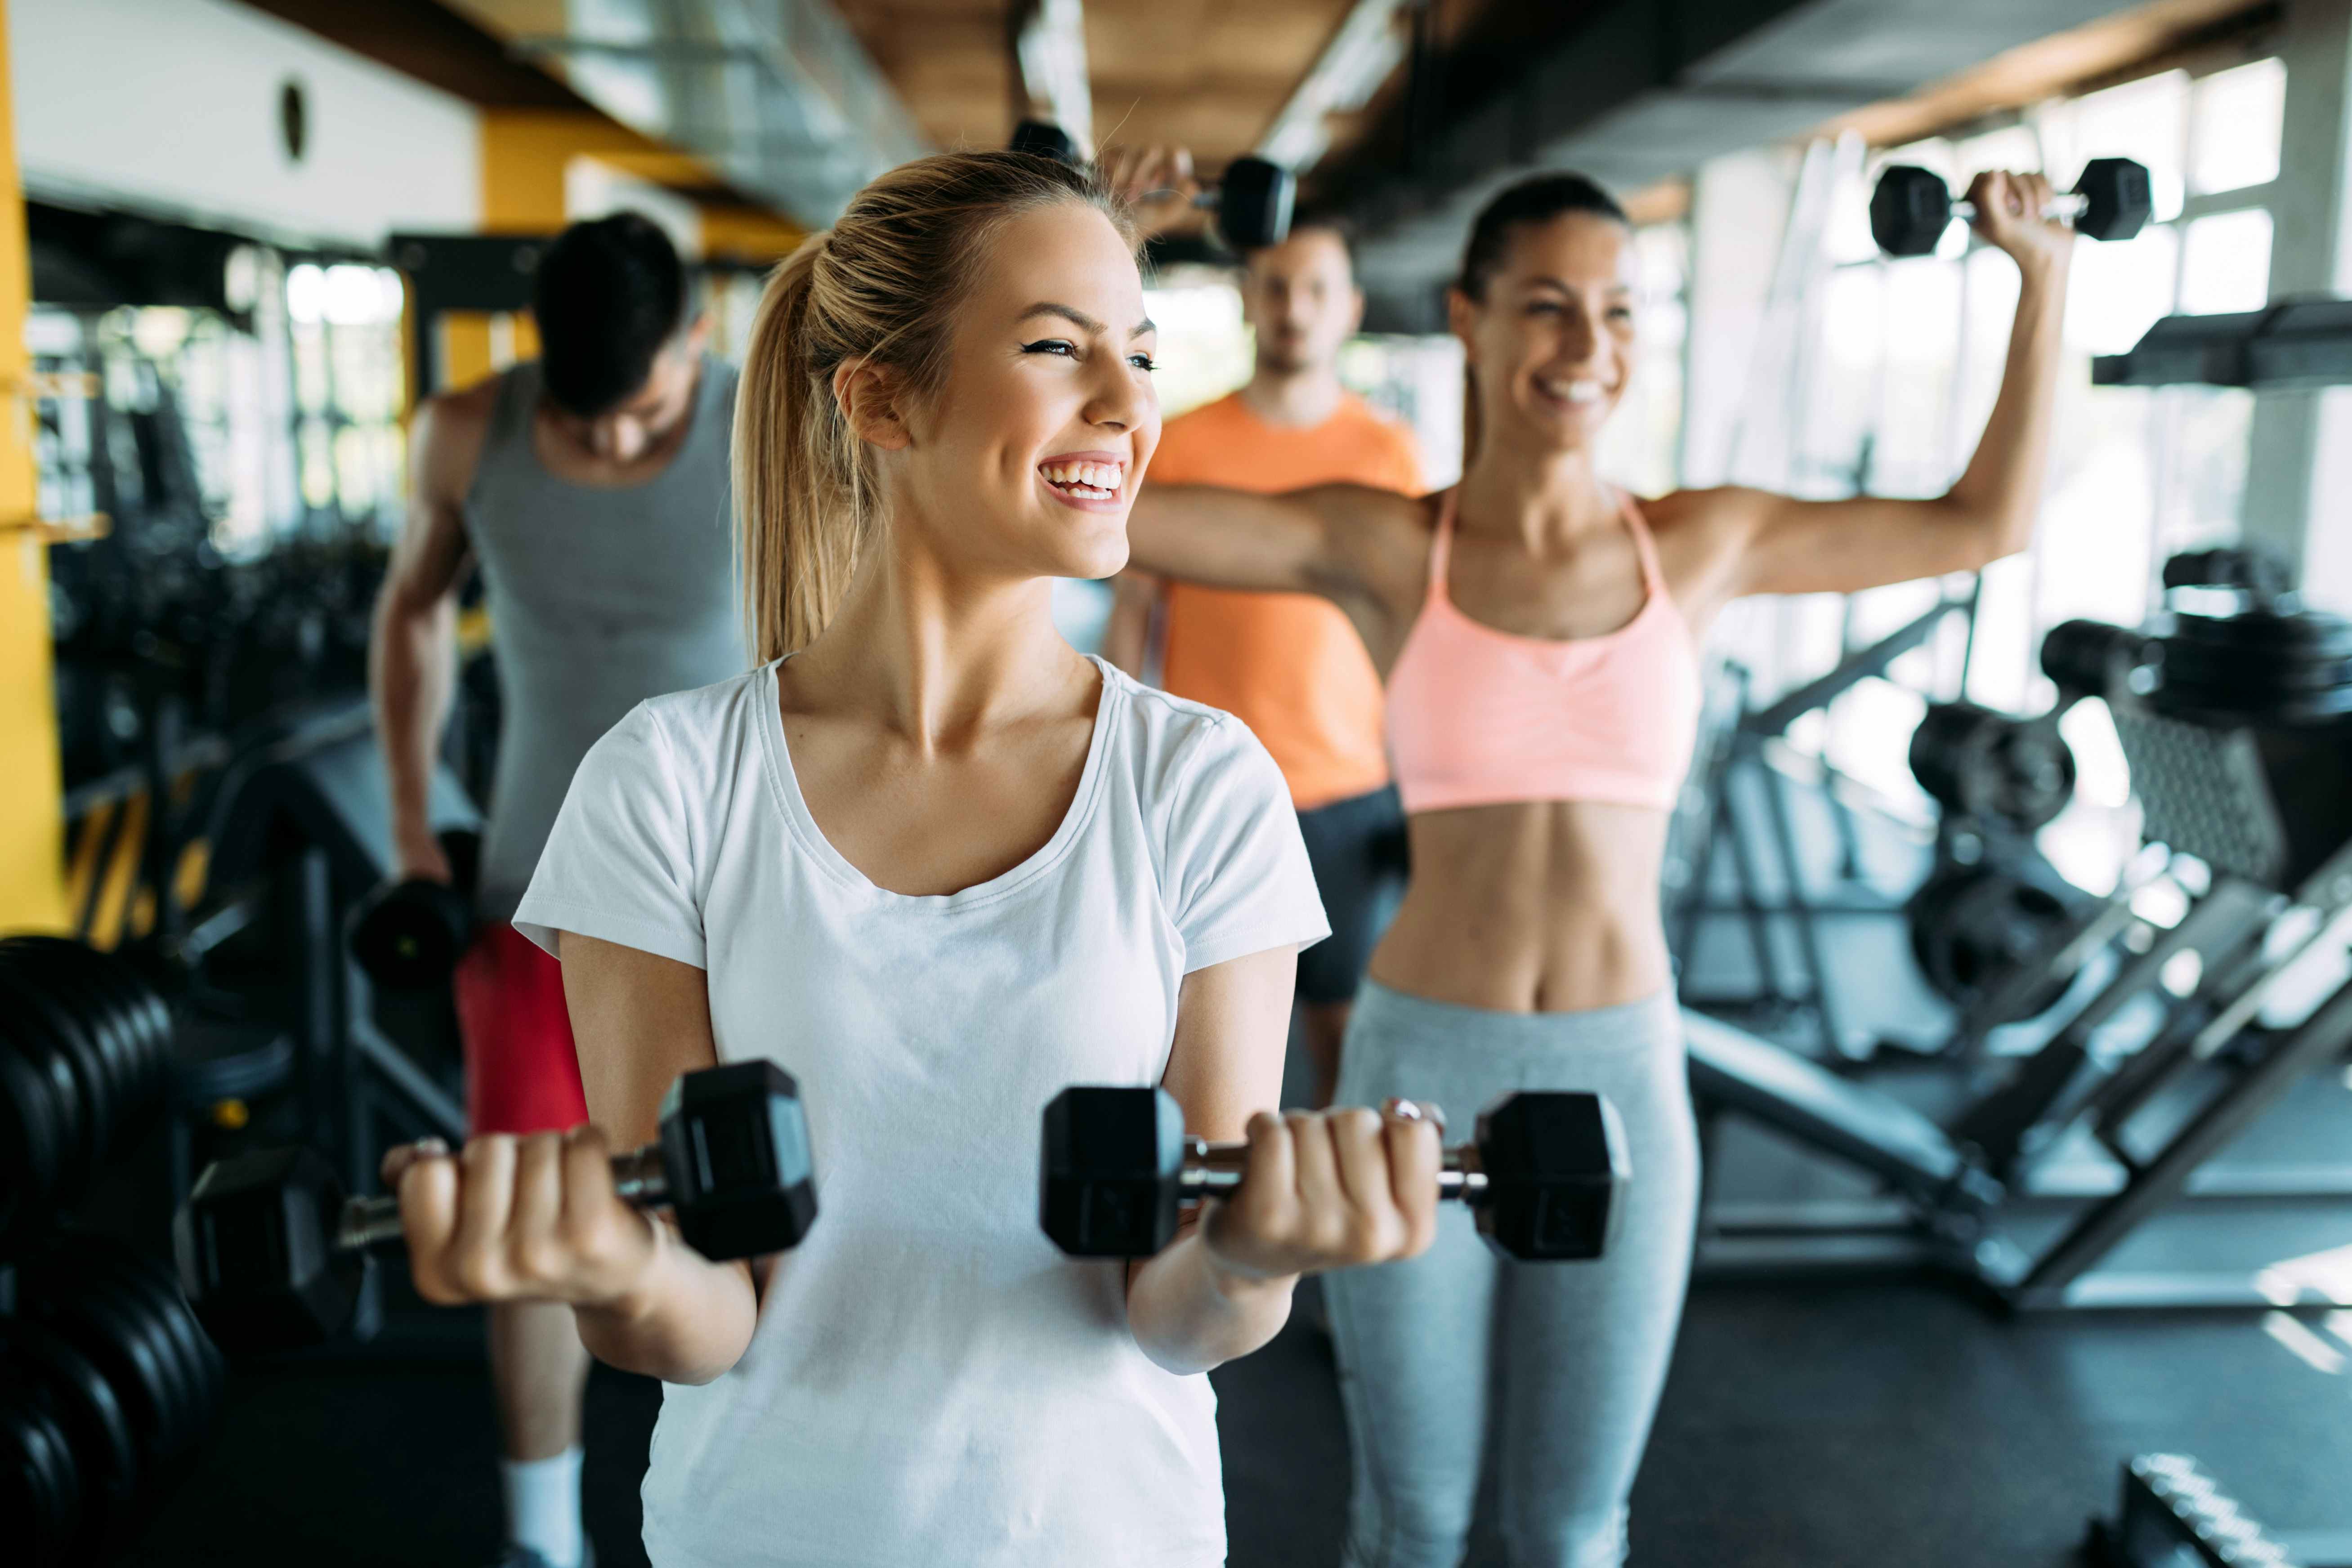 A woman lifting light weights at gym with friends